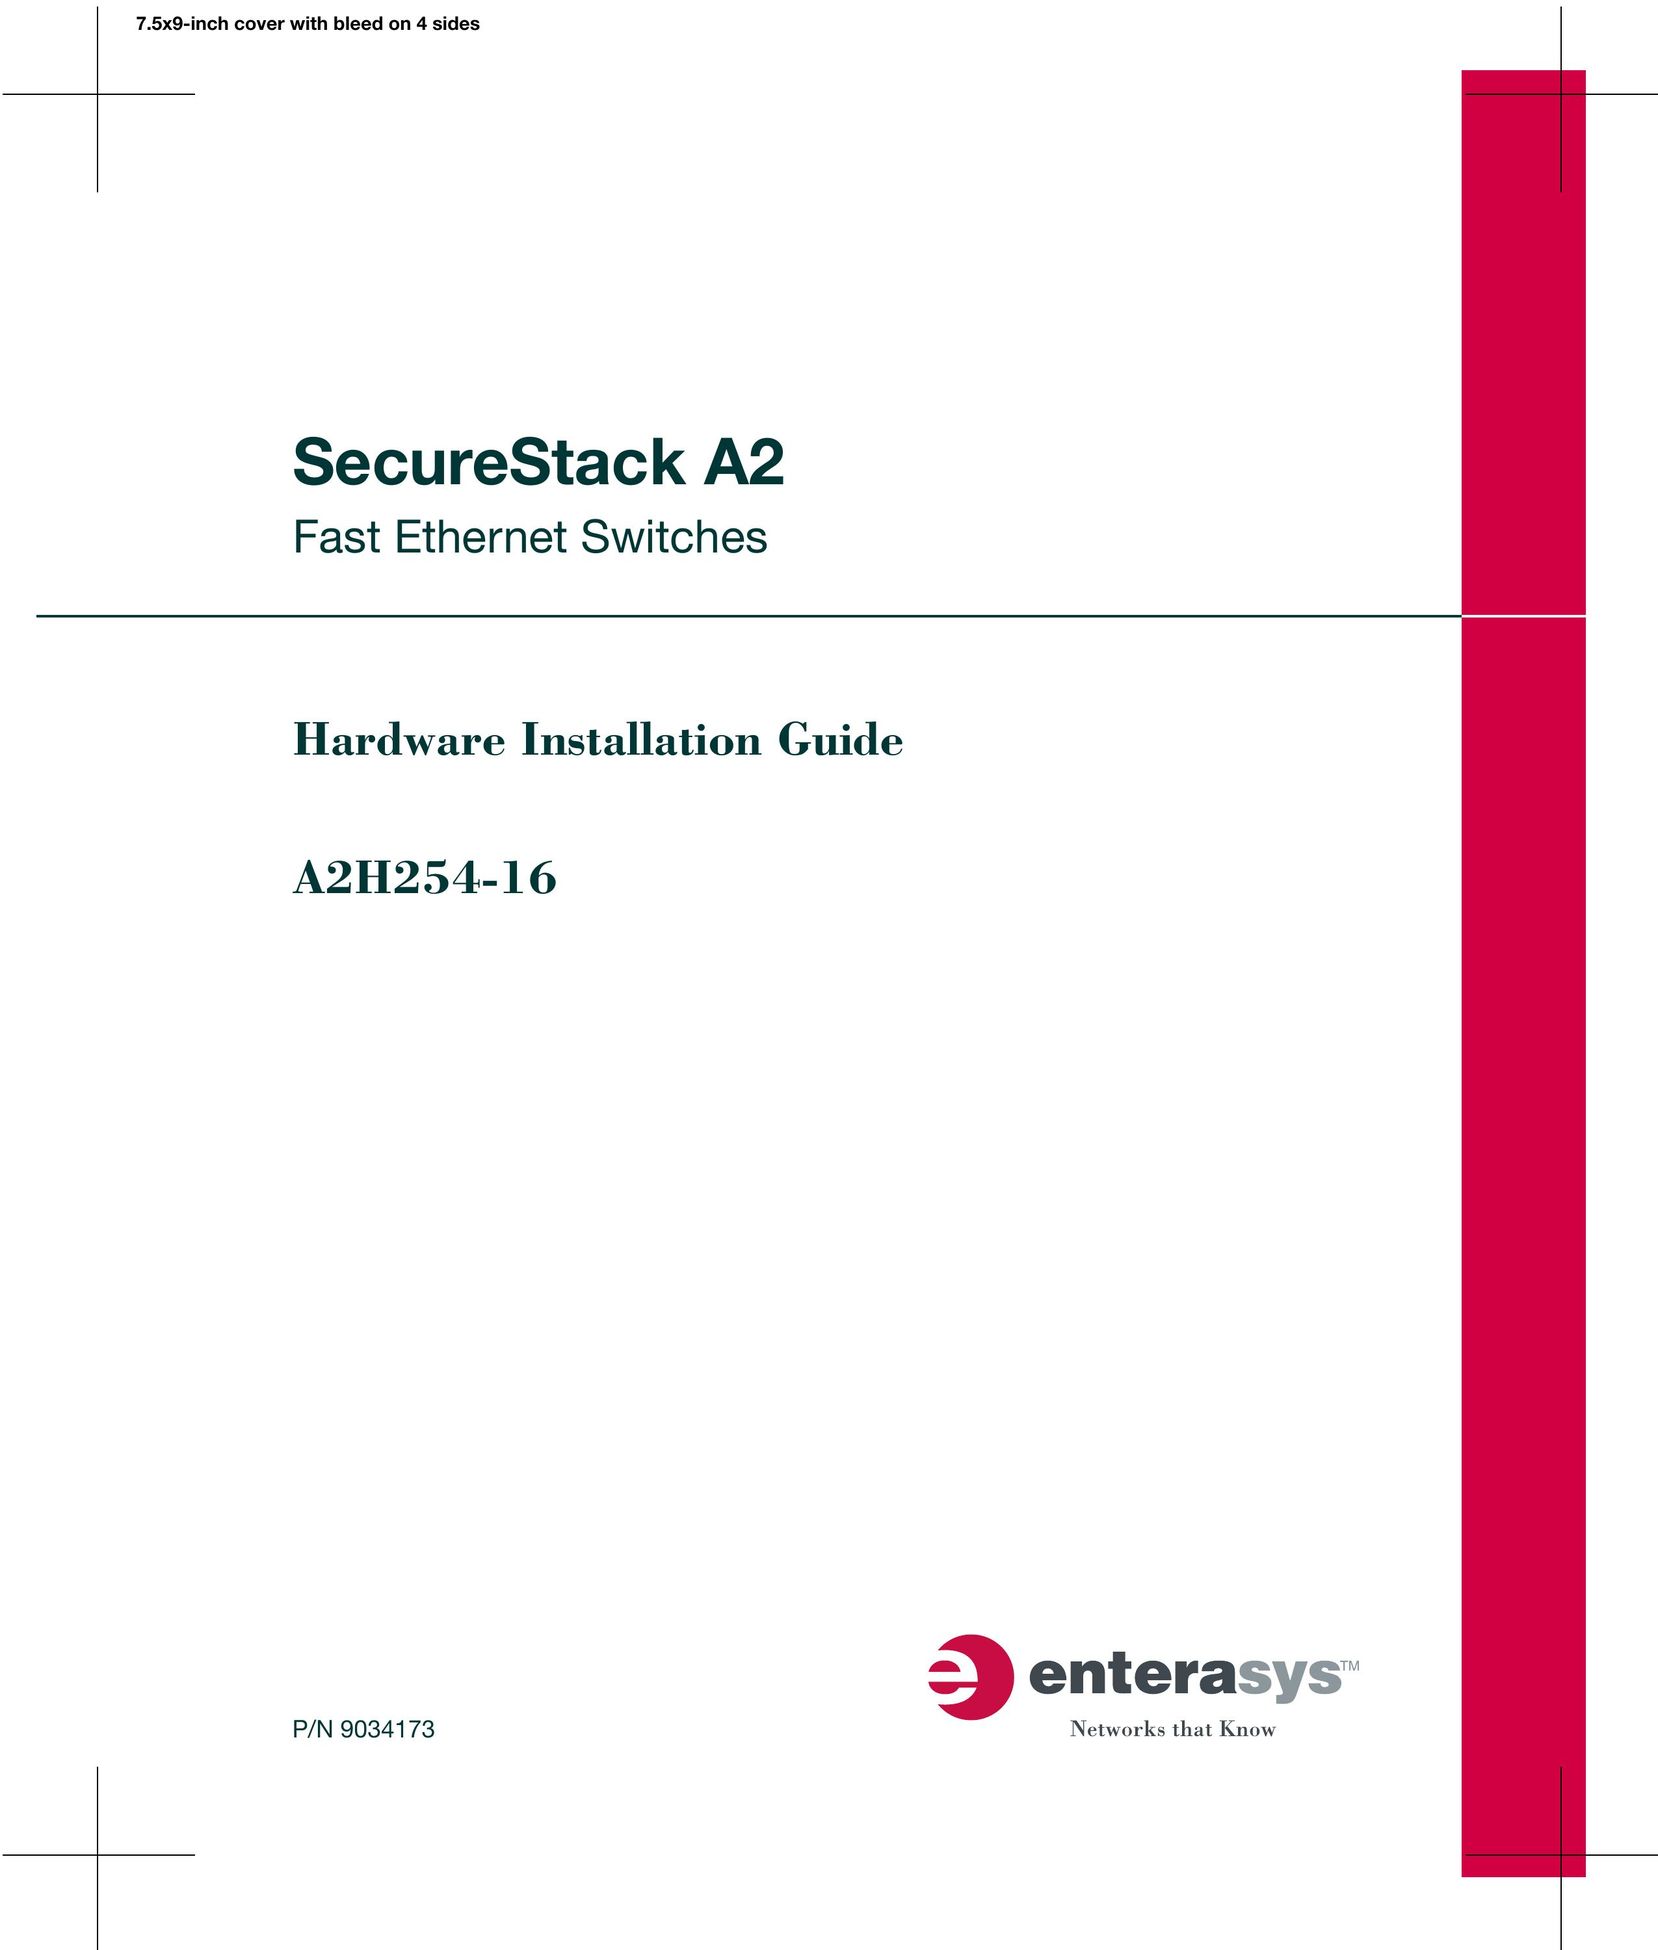 Enterasys Networks A2H254-16 Switch User Manual